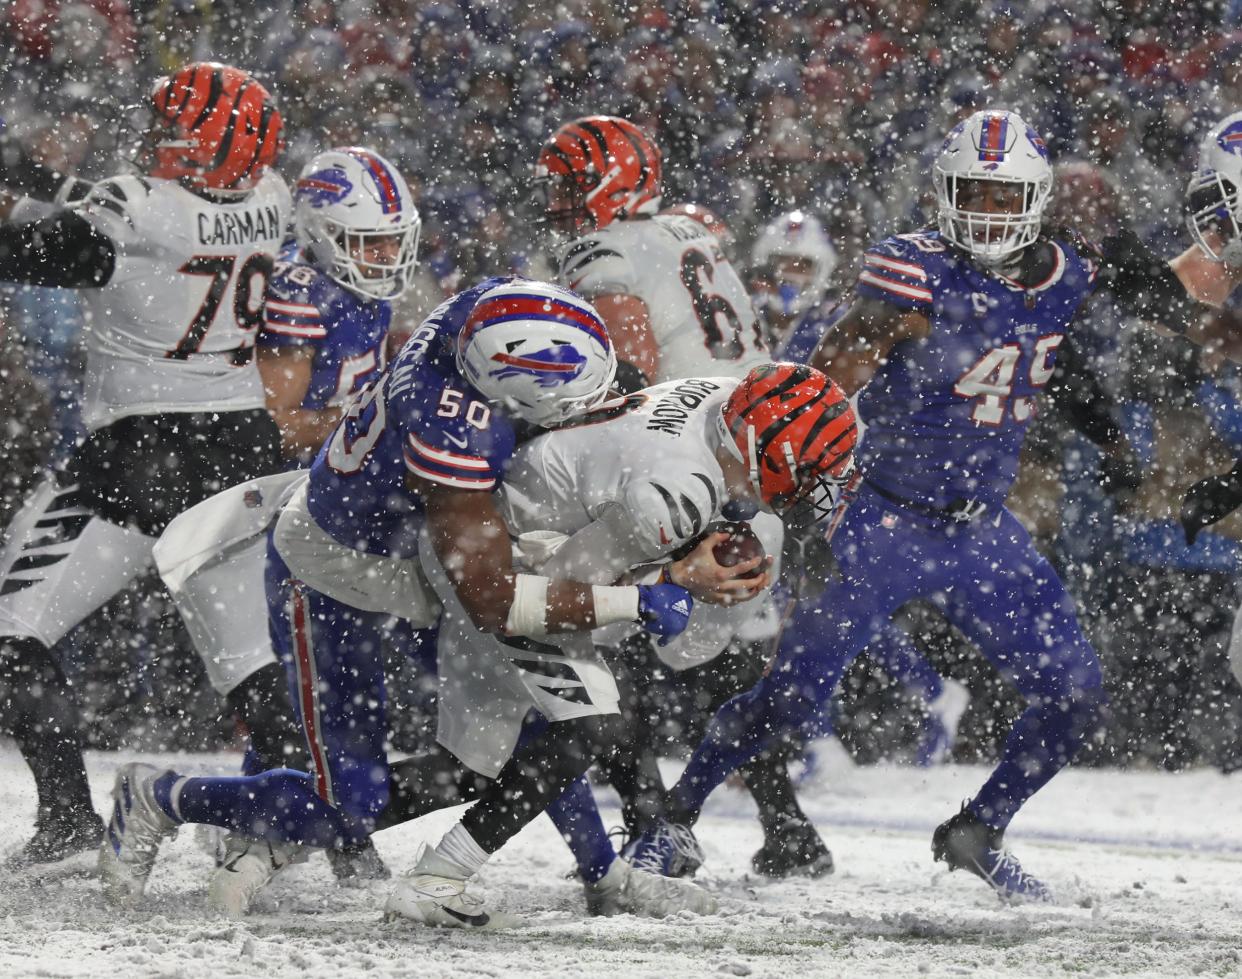 The Bills got the better of QB Joe Burrow on this play last year, but the Bengals went on to win the snowy playoff game at Highmark Stadium.